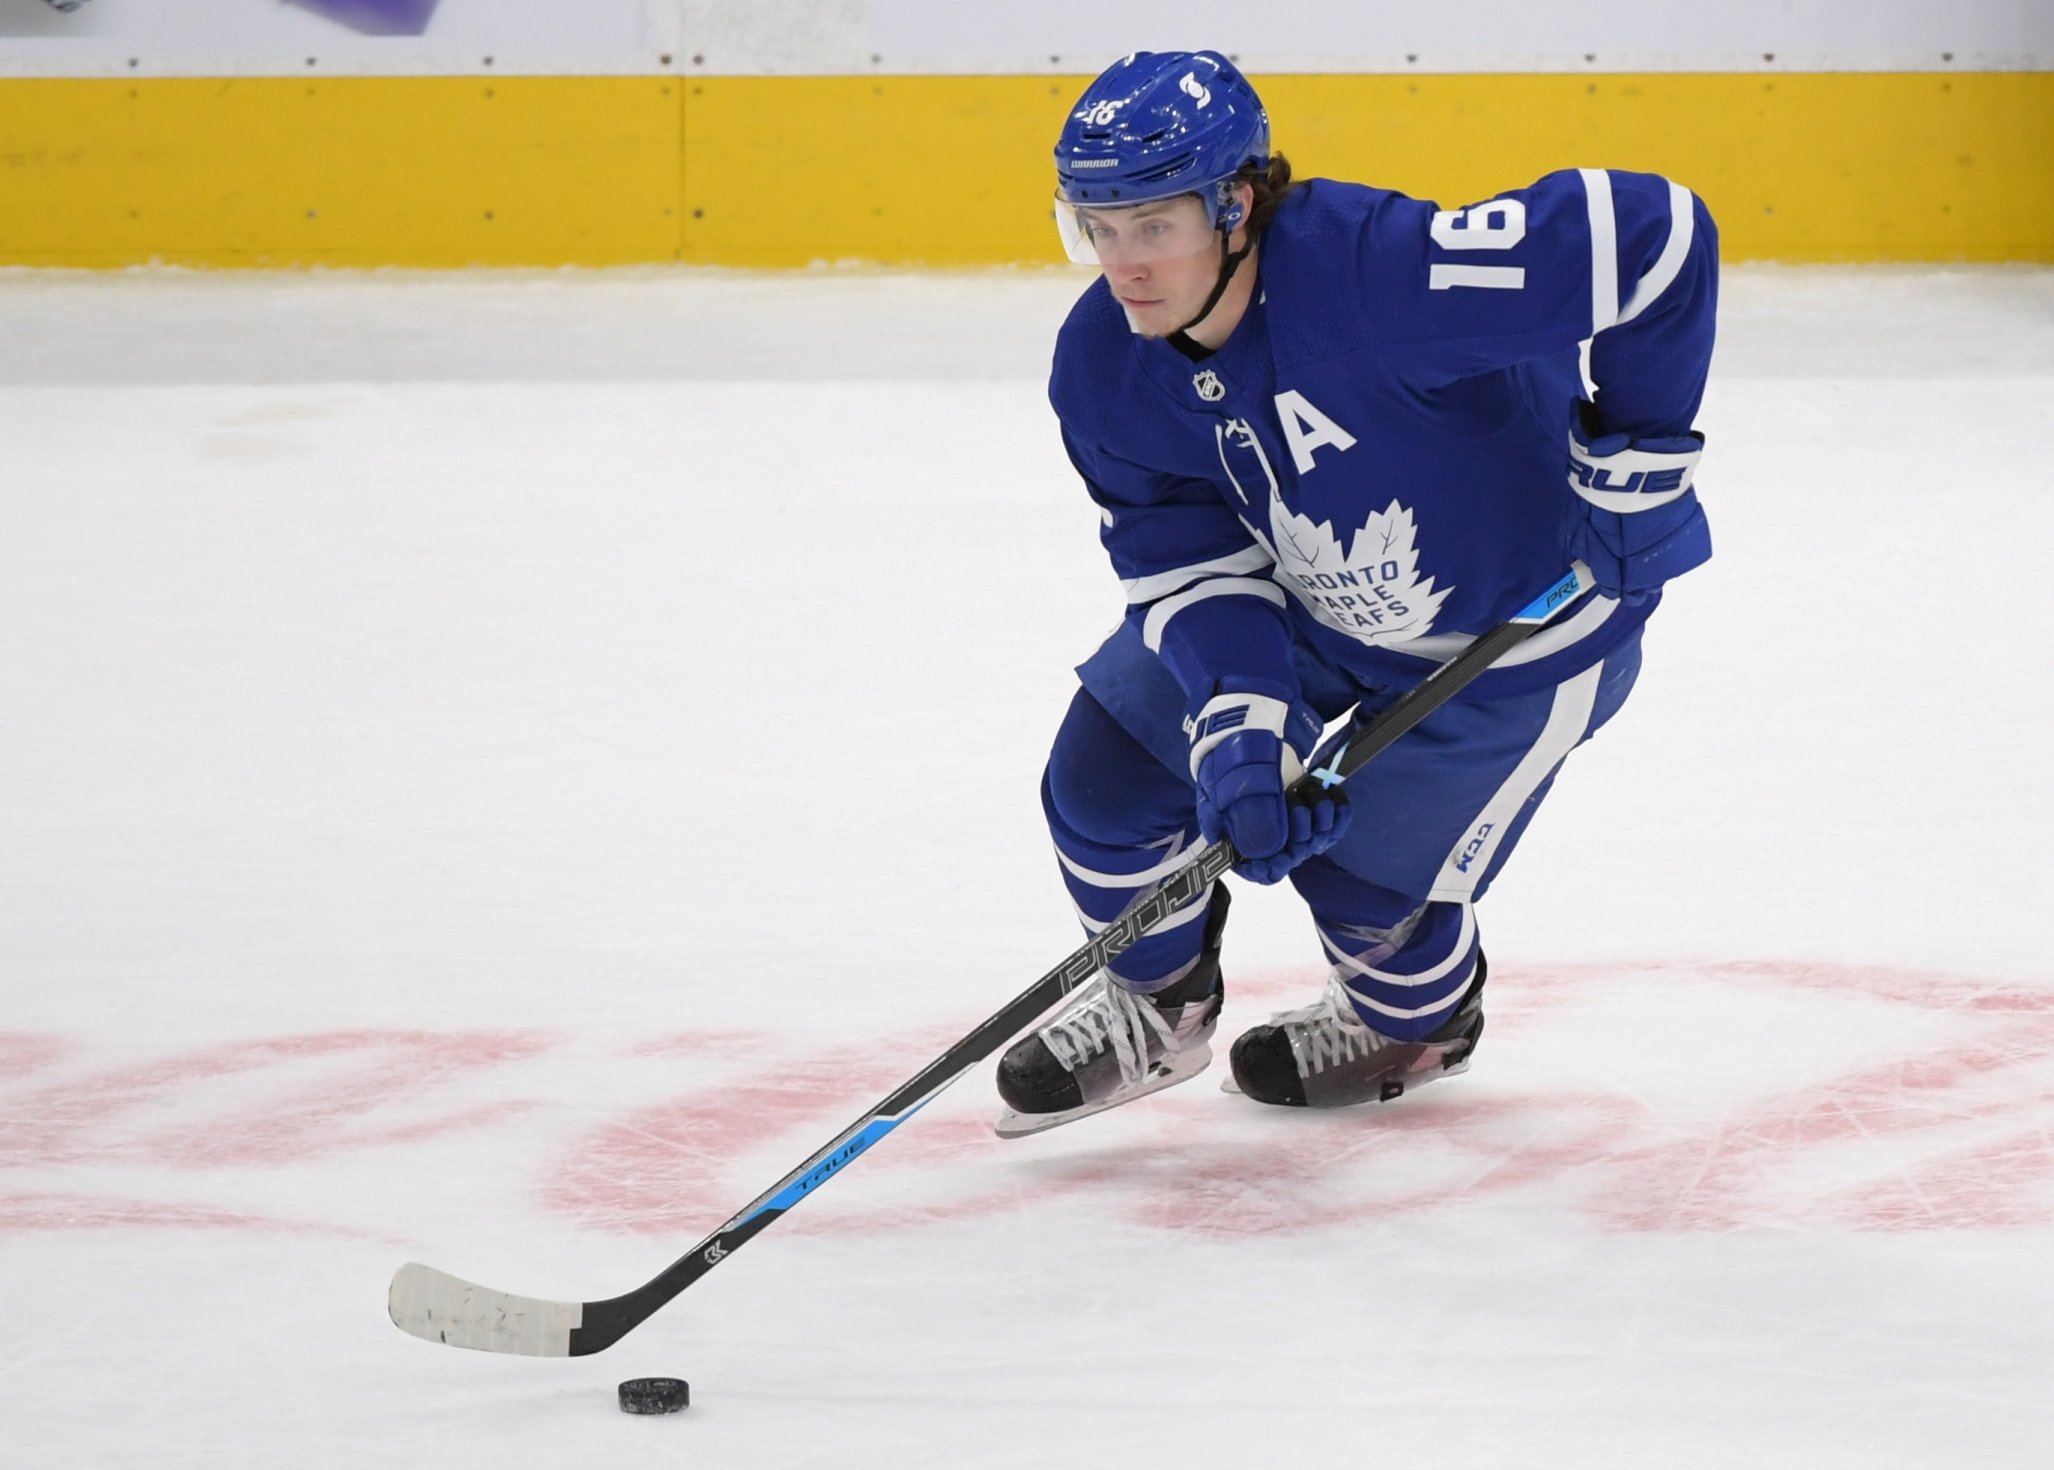 Jones for Marner: Why Both Columbus And Toronto Would Benefit From A Swap